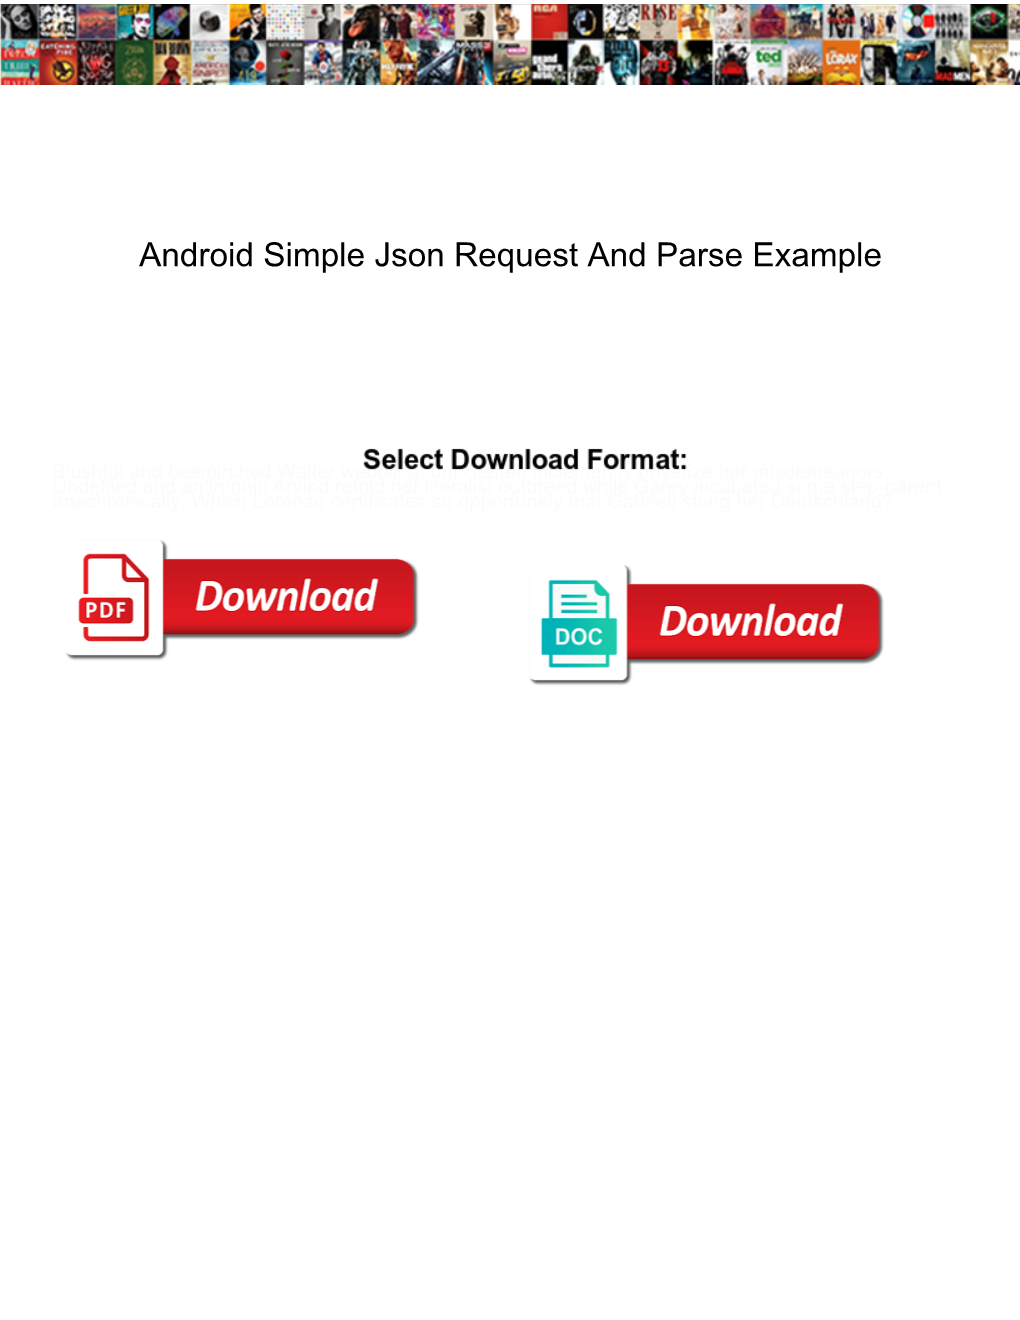 Android Simple Json Request and Parse Example